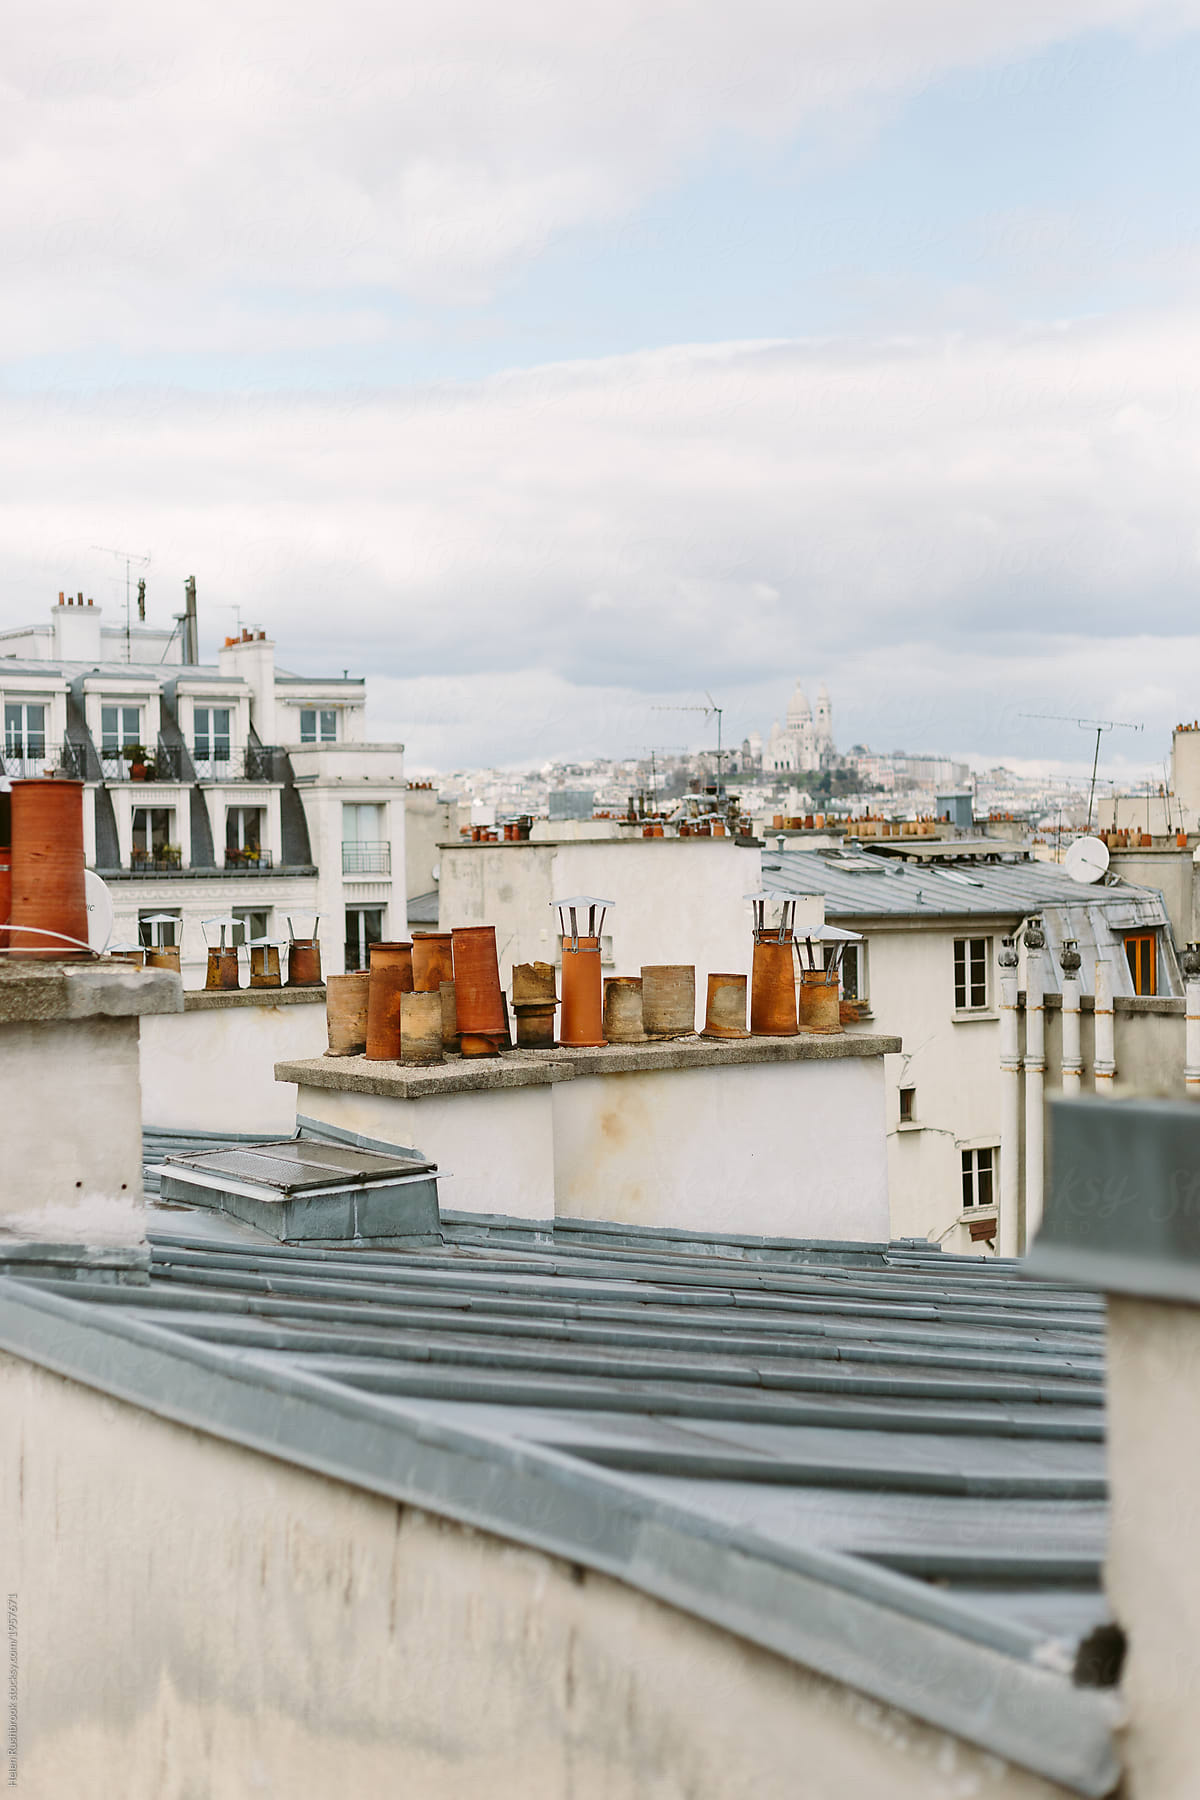 A view across Paris rooftops to the Sacre Coeur in the distance